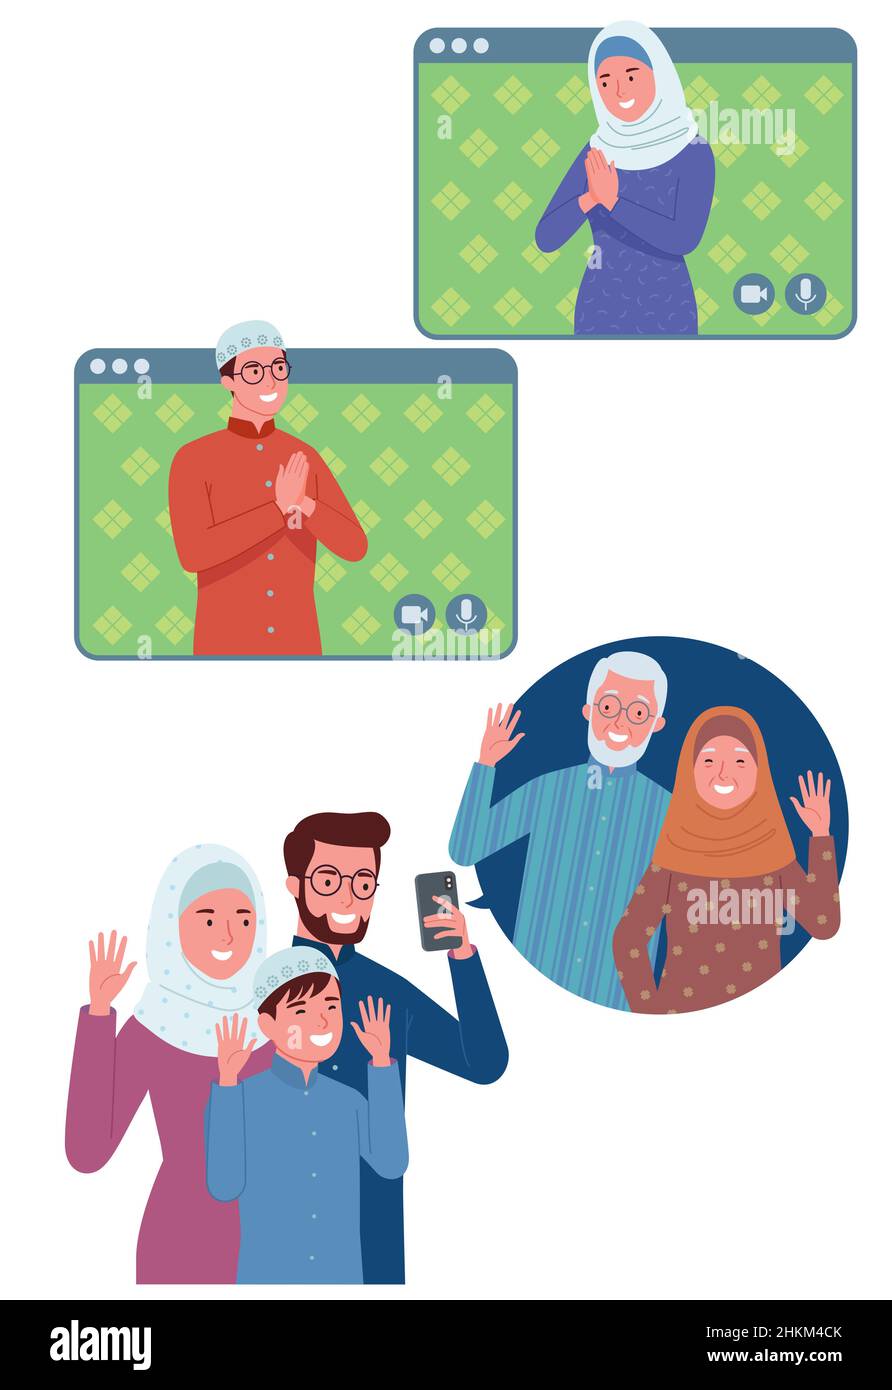 Muslim family making a video call Stock Vector